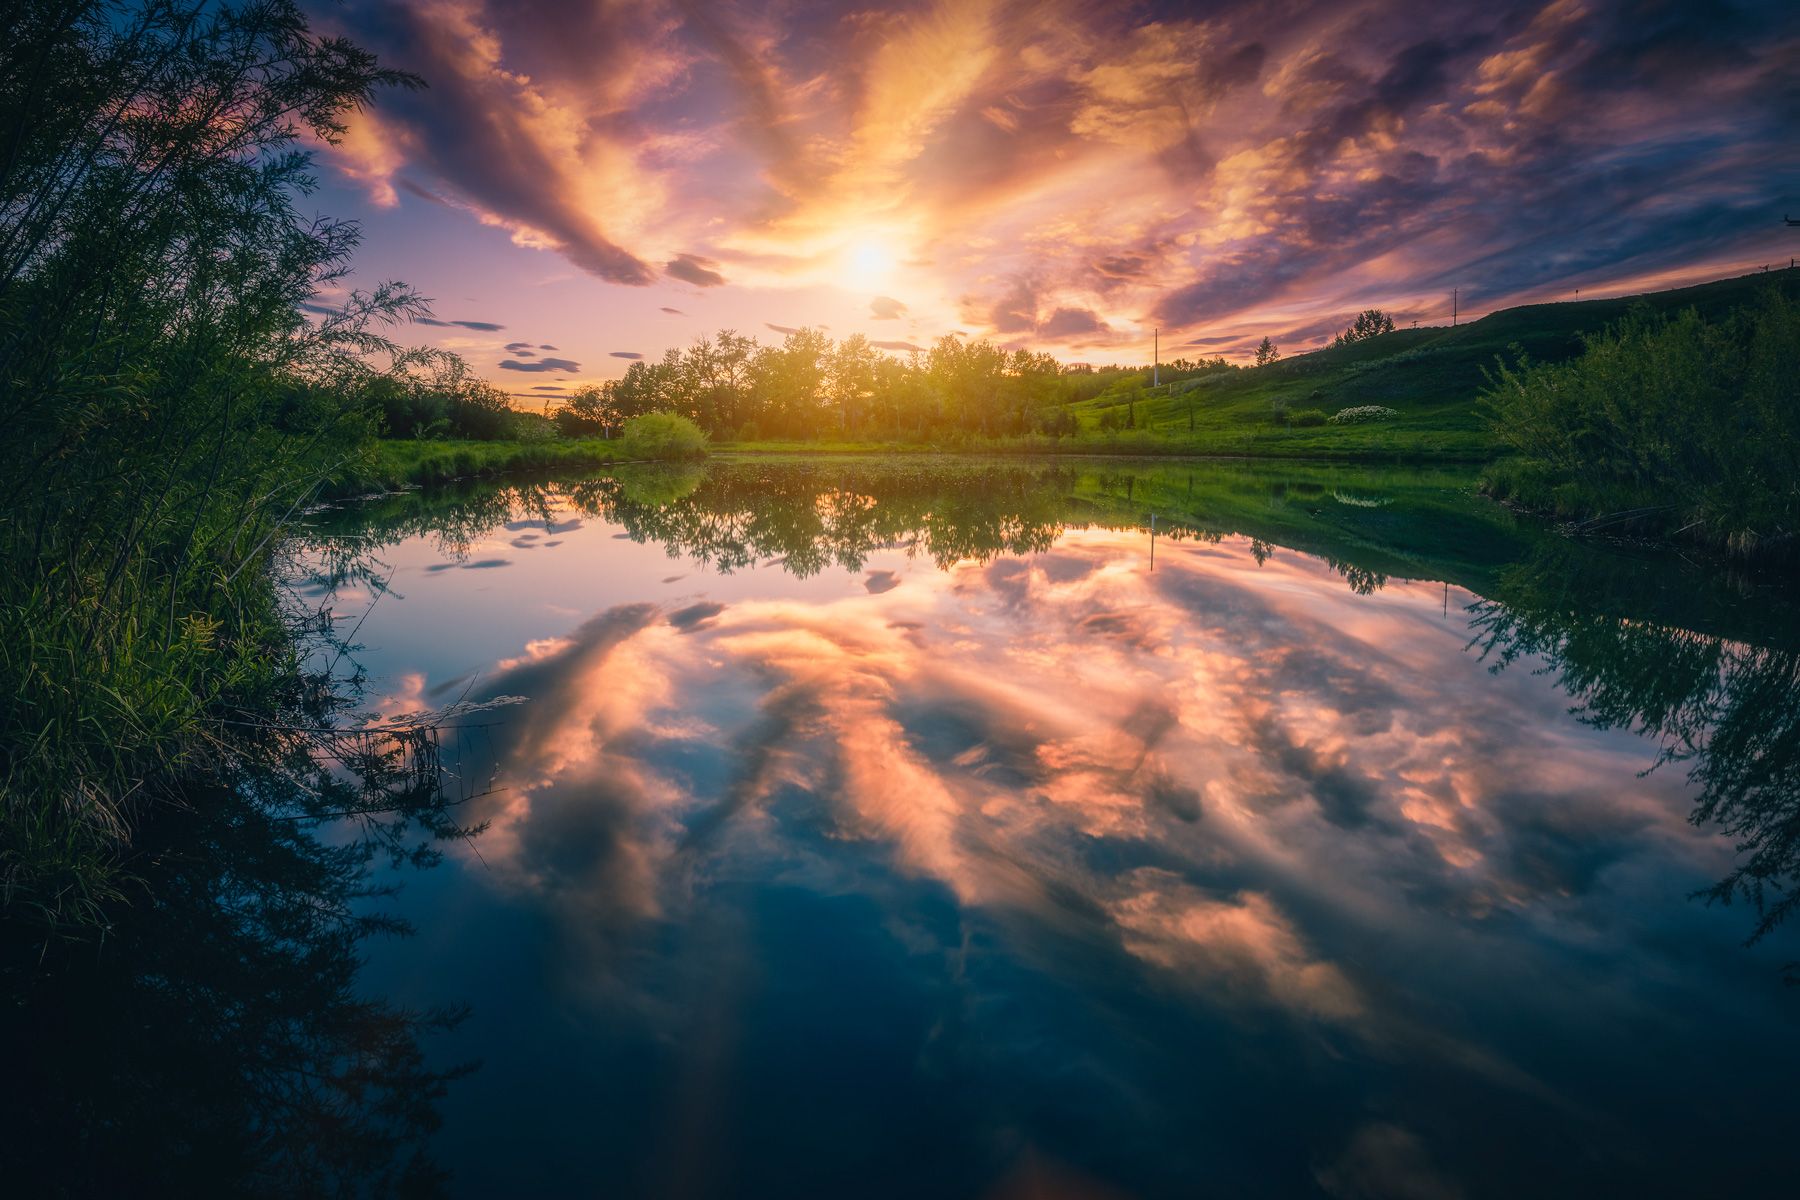 landscape, nature, outdoor, sunset, water, river, lake, forest, tree, reflection, mirror, sky, natural, lifestyle, Zhao Huapu